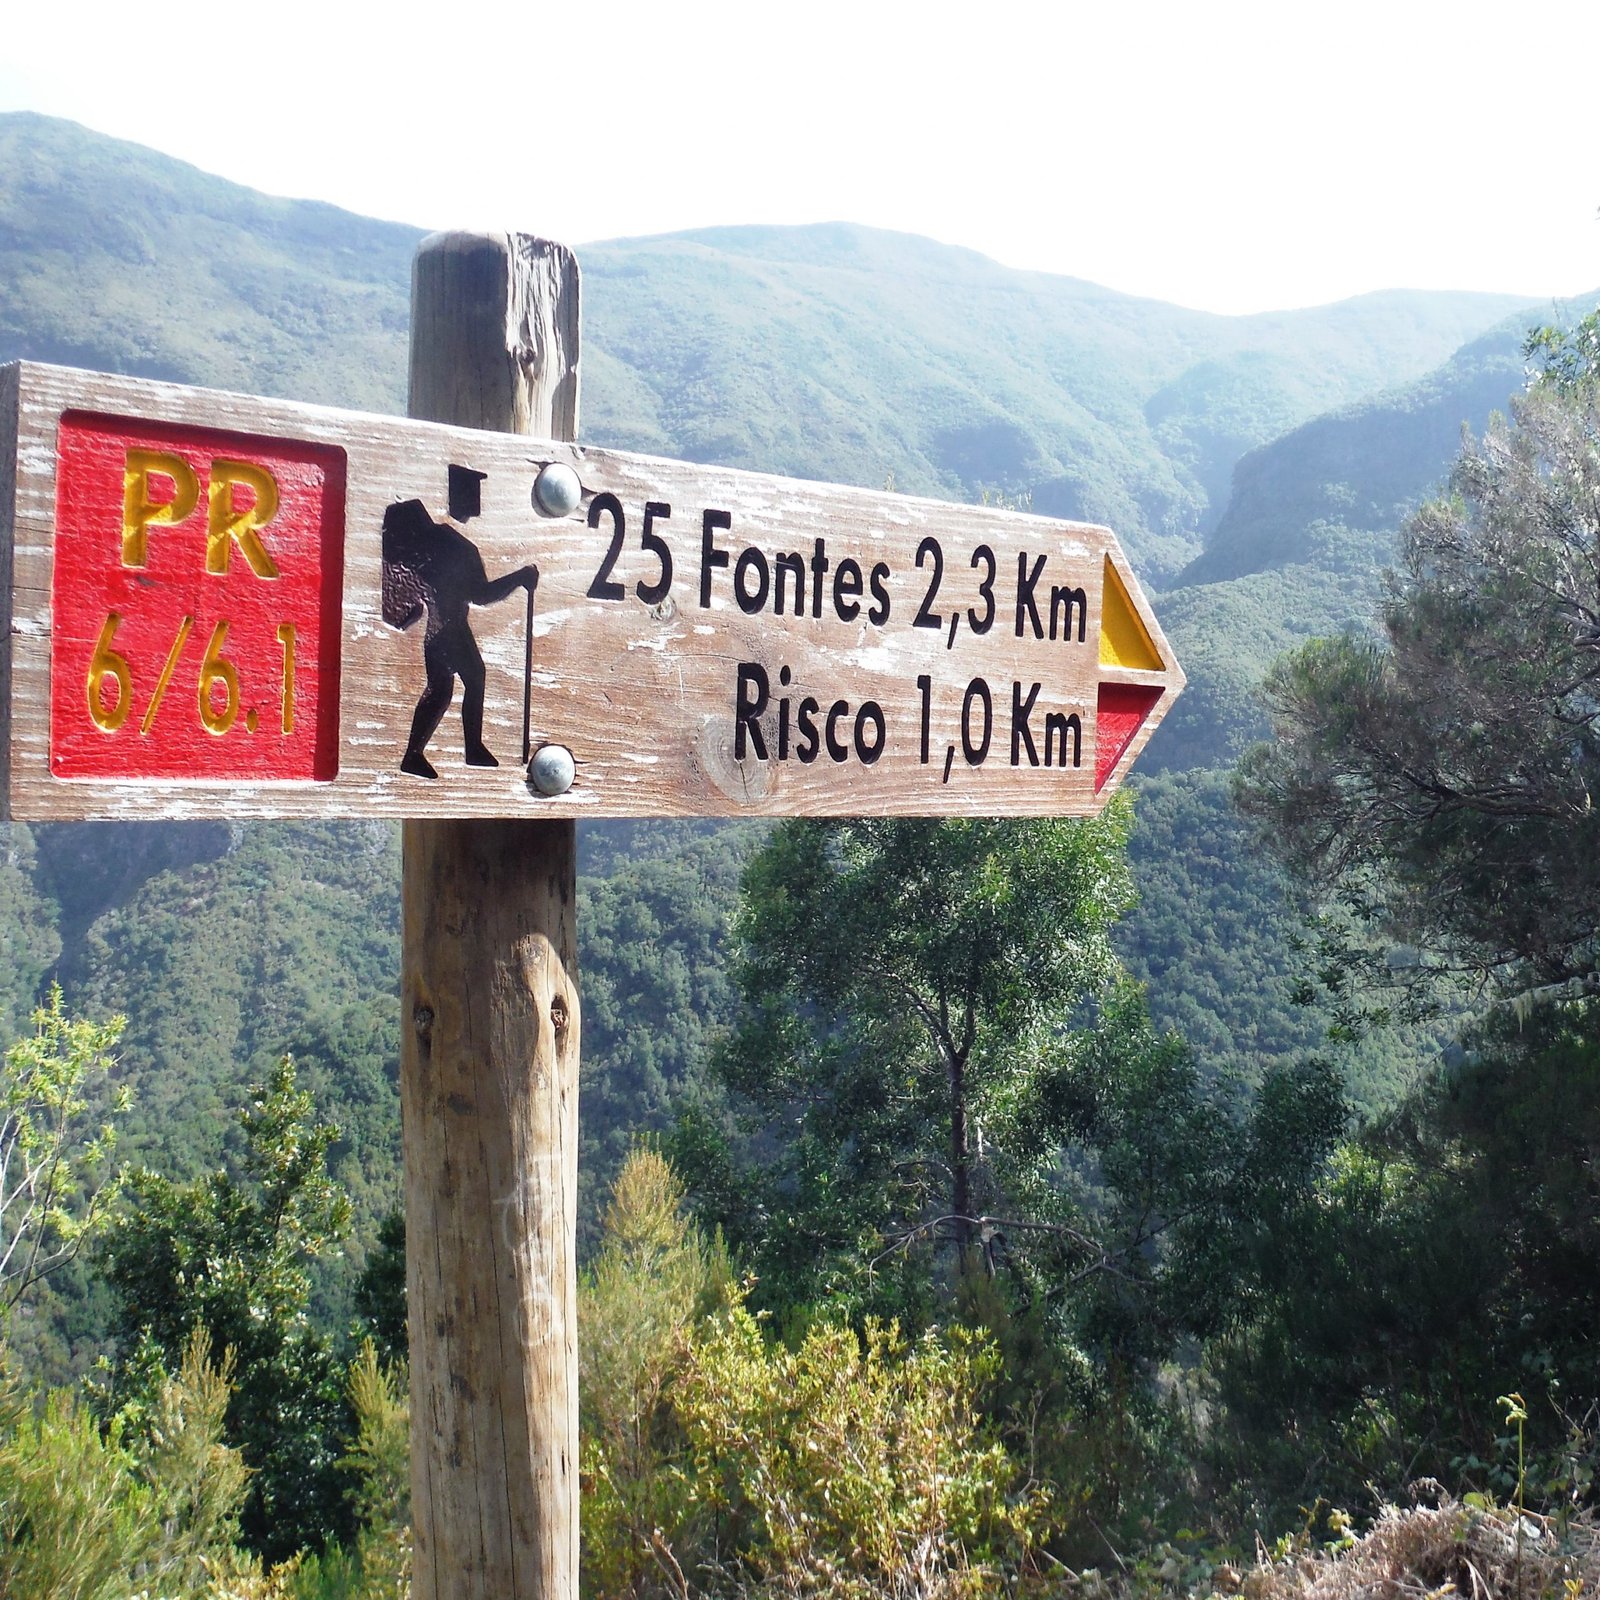 Rabaçal Trails will start being Paid